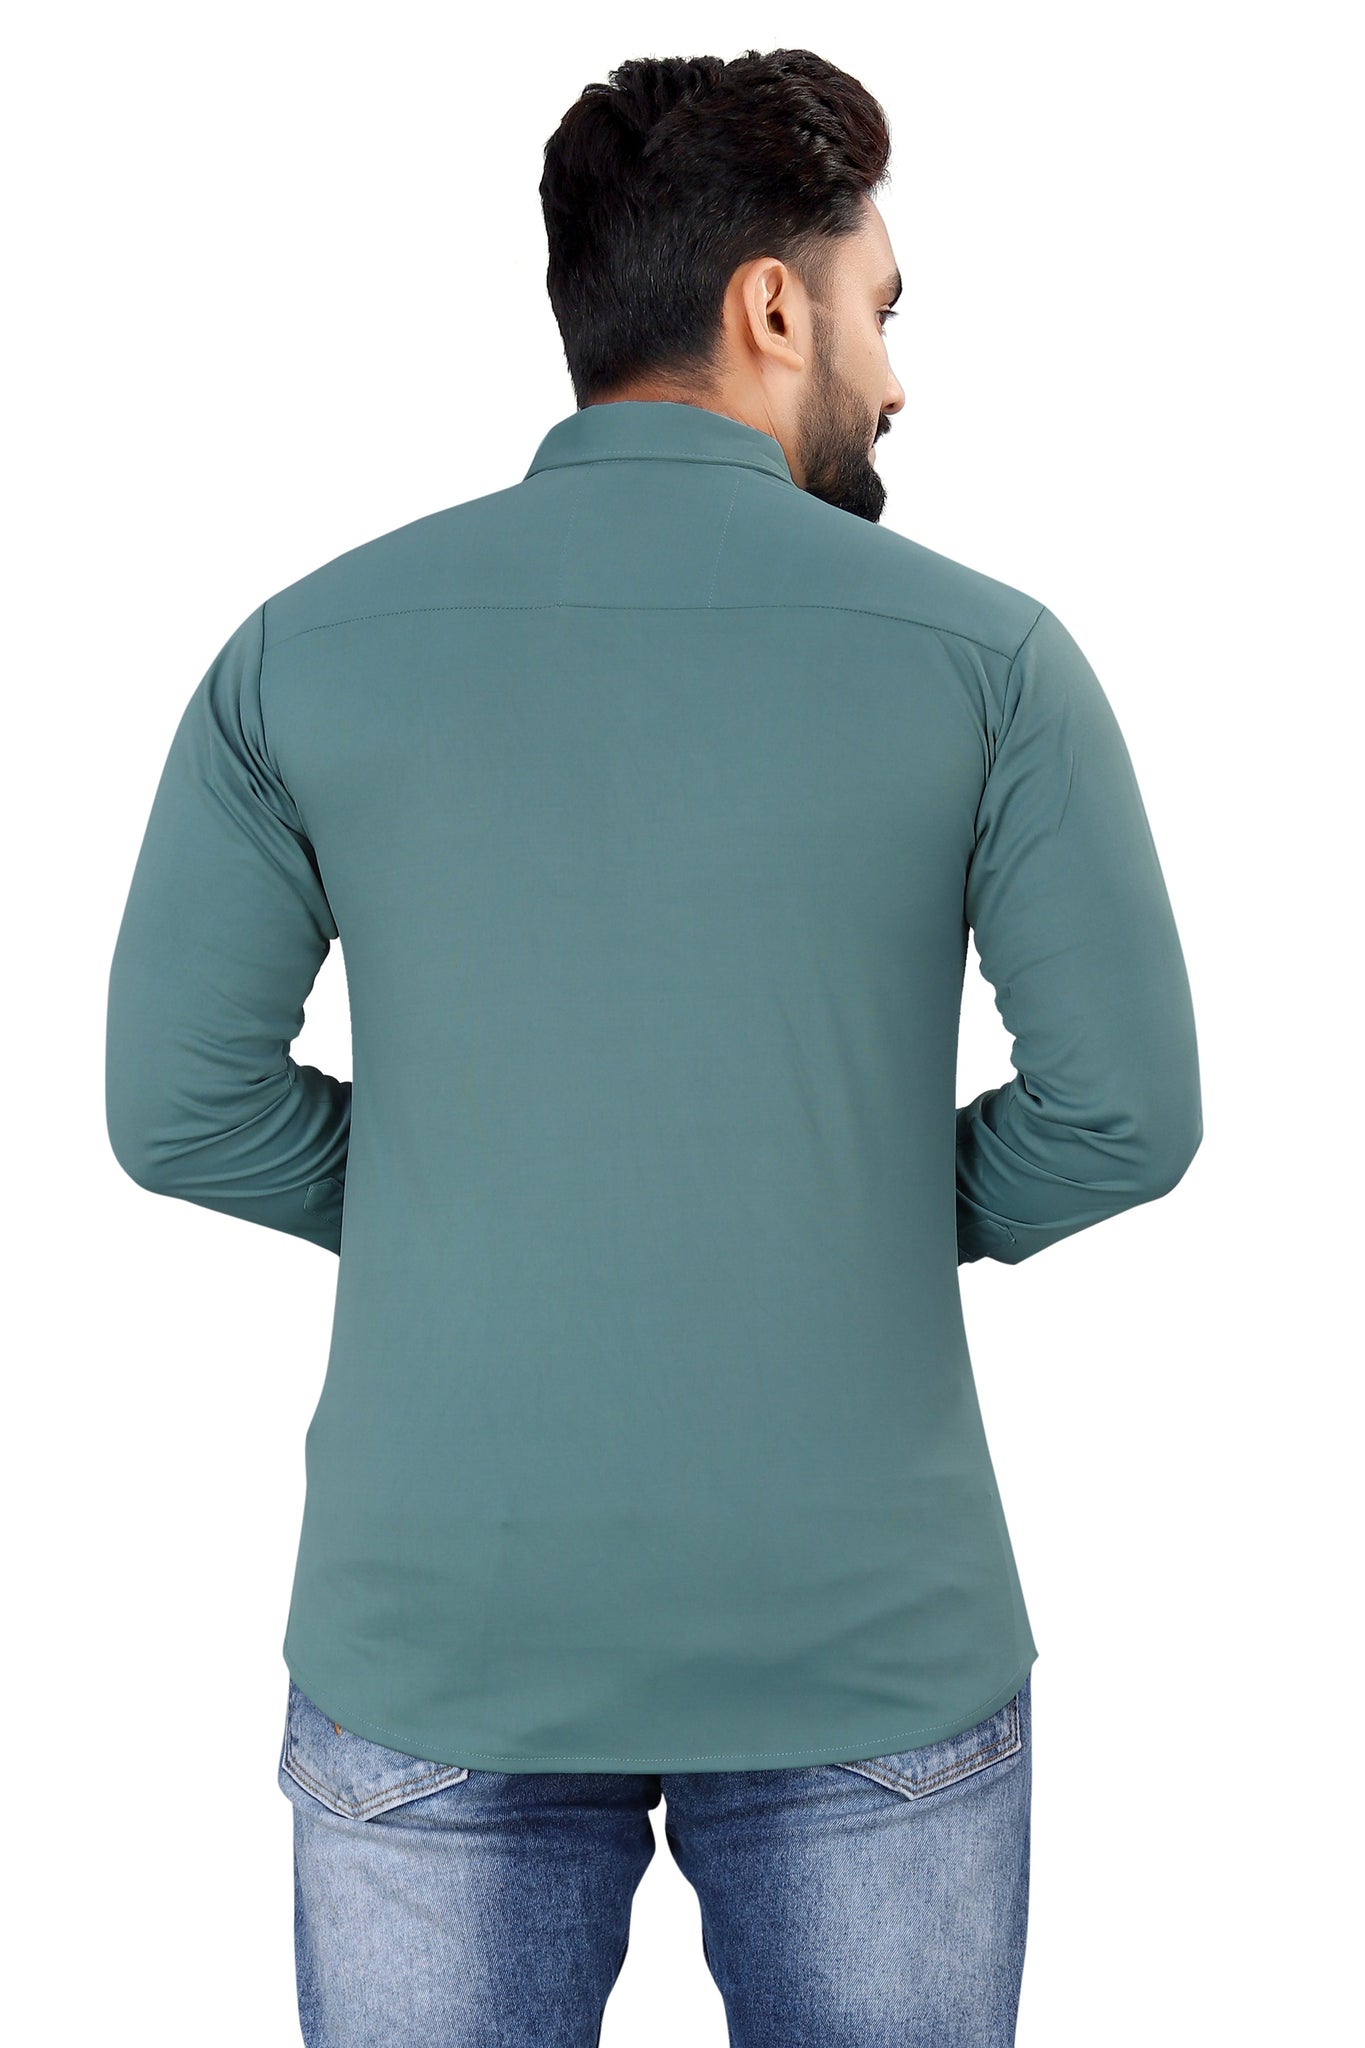 Full Stretchable Lycra Solid Shirt